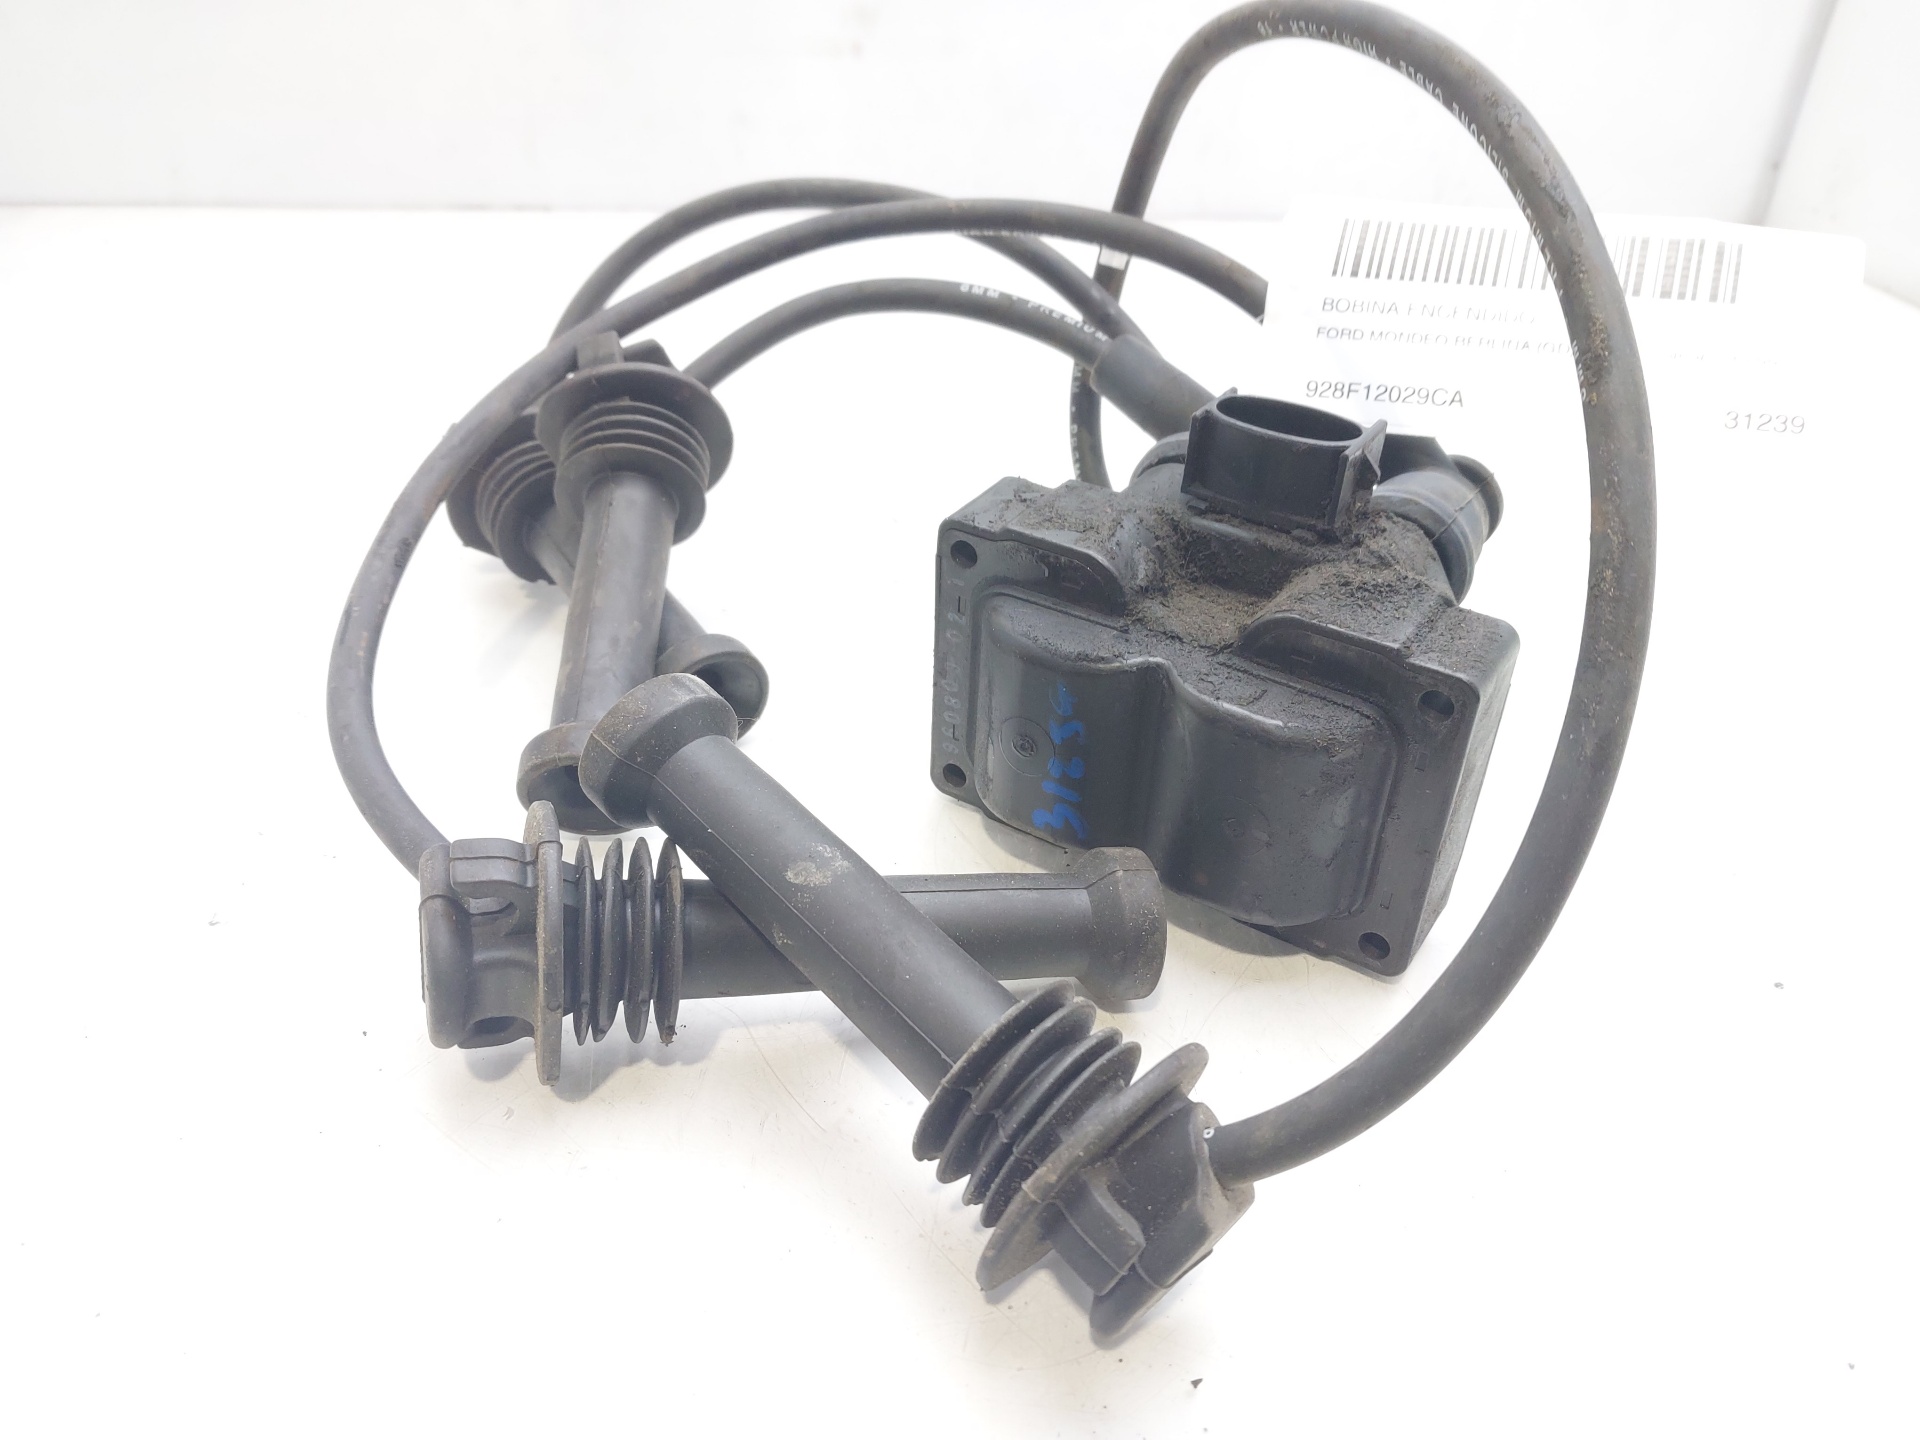 FORD Transit 1 generation (1993-1996) High Voltage Ignition Coil 928F12029CA 23031960